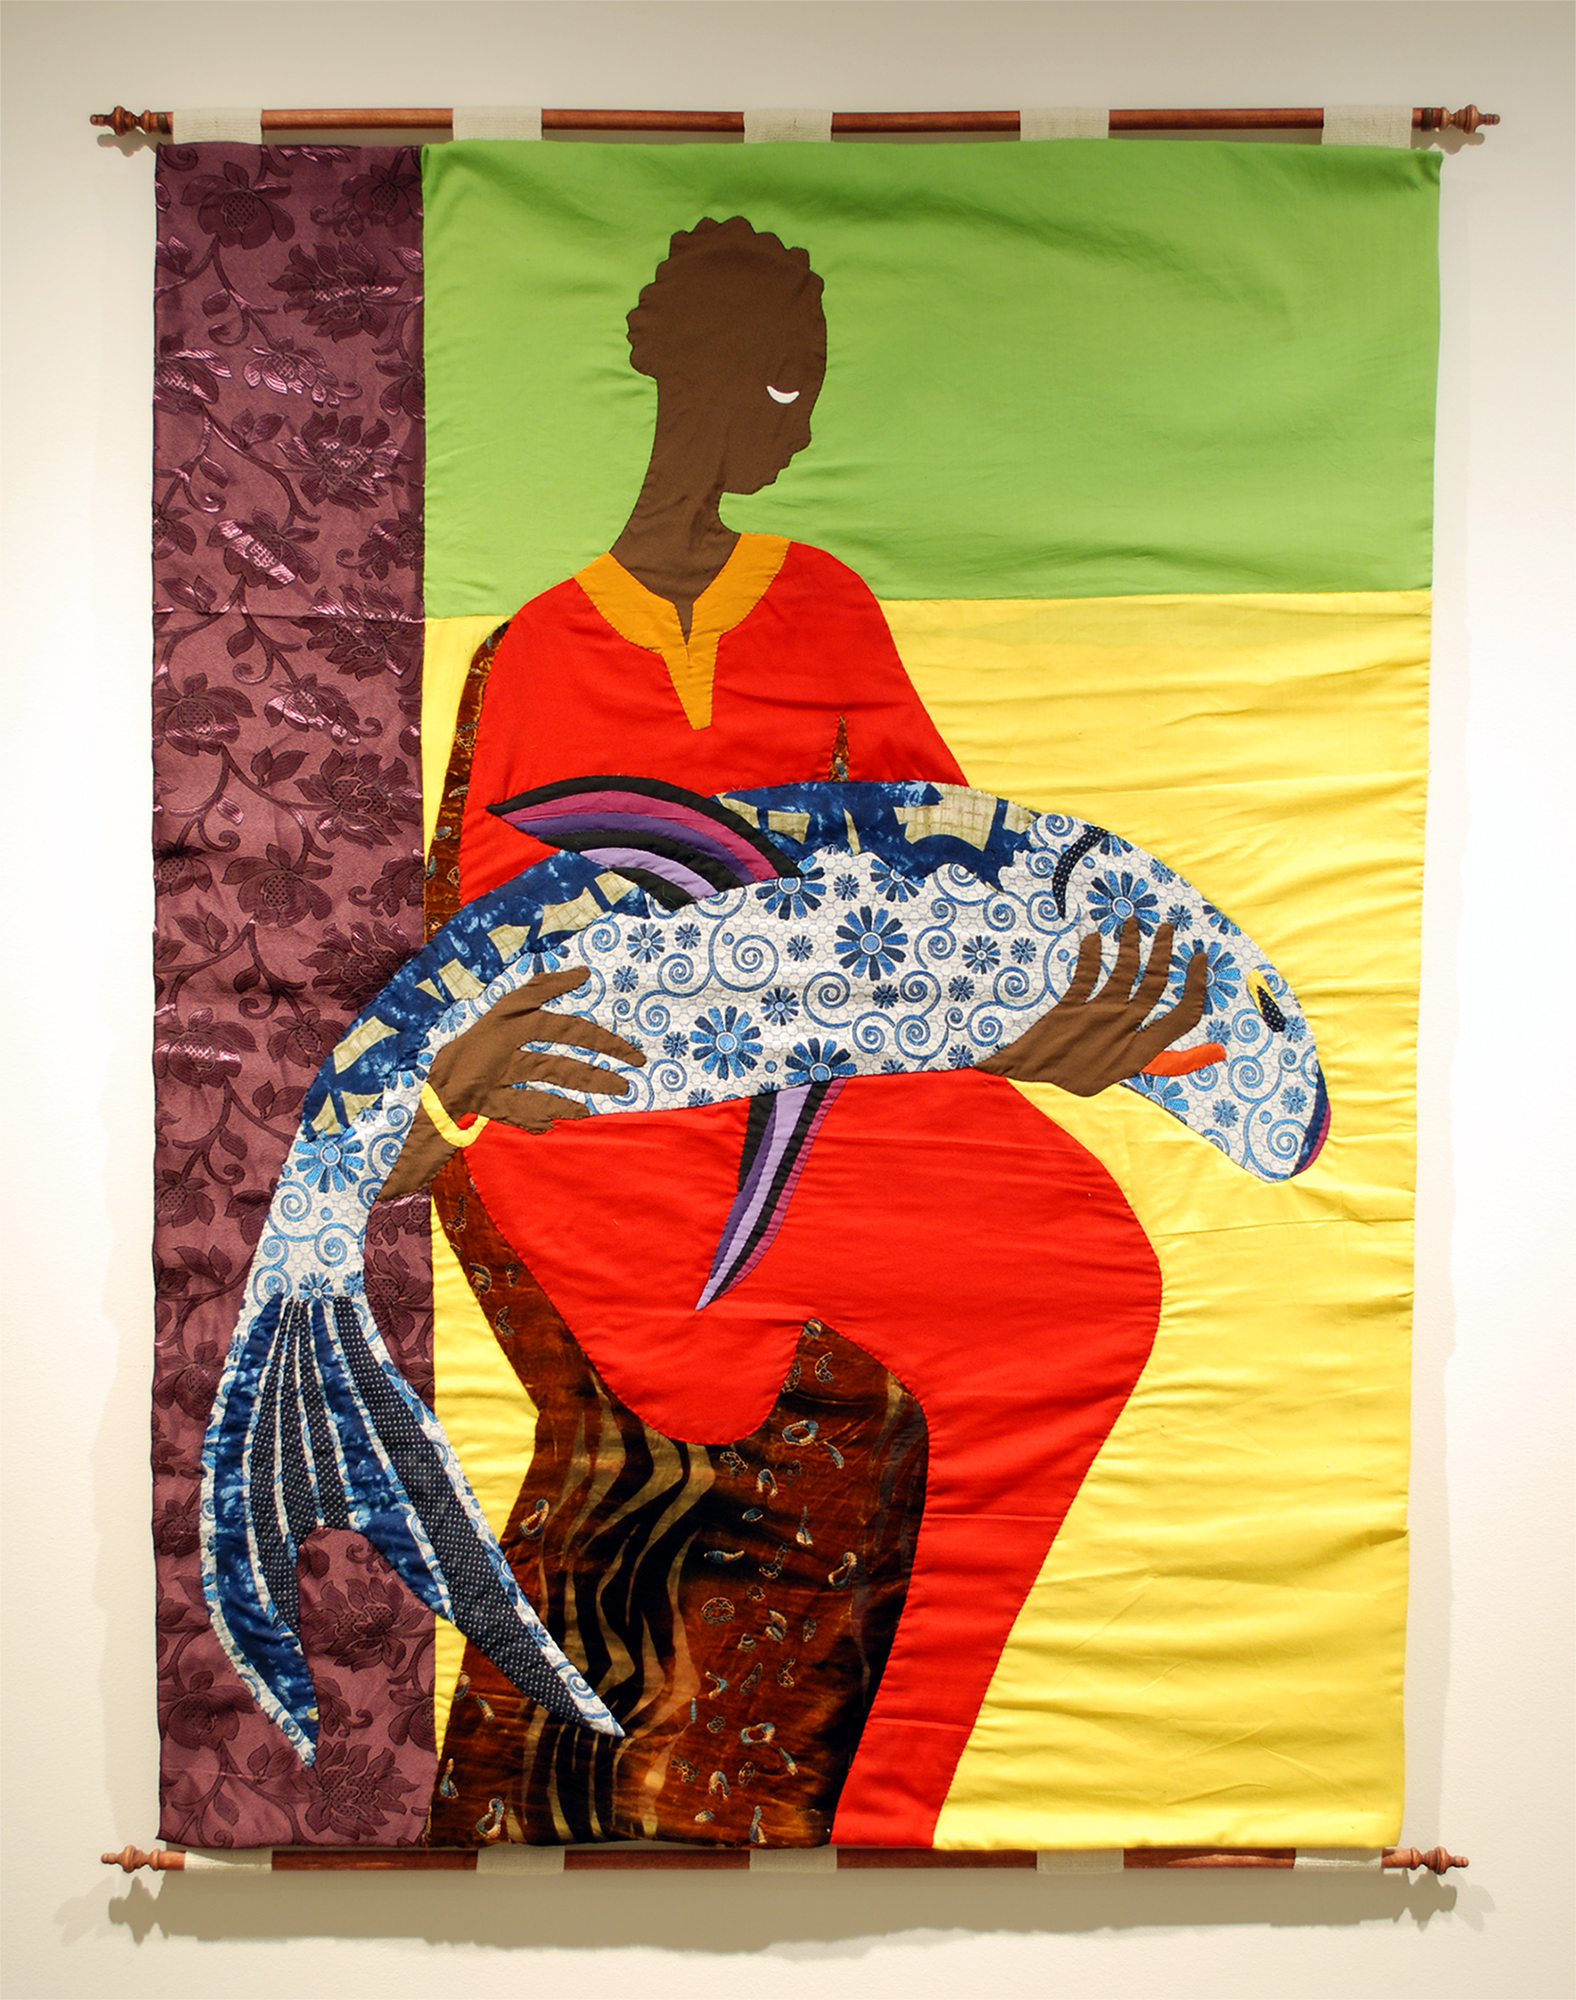 Image of tapestry work by Christopher Myers featured image of Black woman in a red dress holding a large blue and white fish. The background features a embroidered purple stripe on the left and a horizontal lime green stripe at top right with yellow rectangle filling the remainder of the background. The work is hung on wooden dowels.